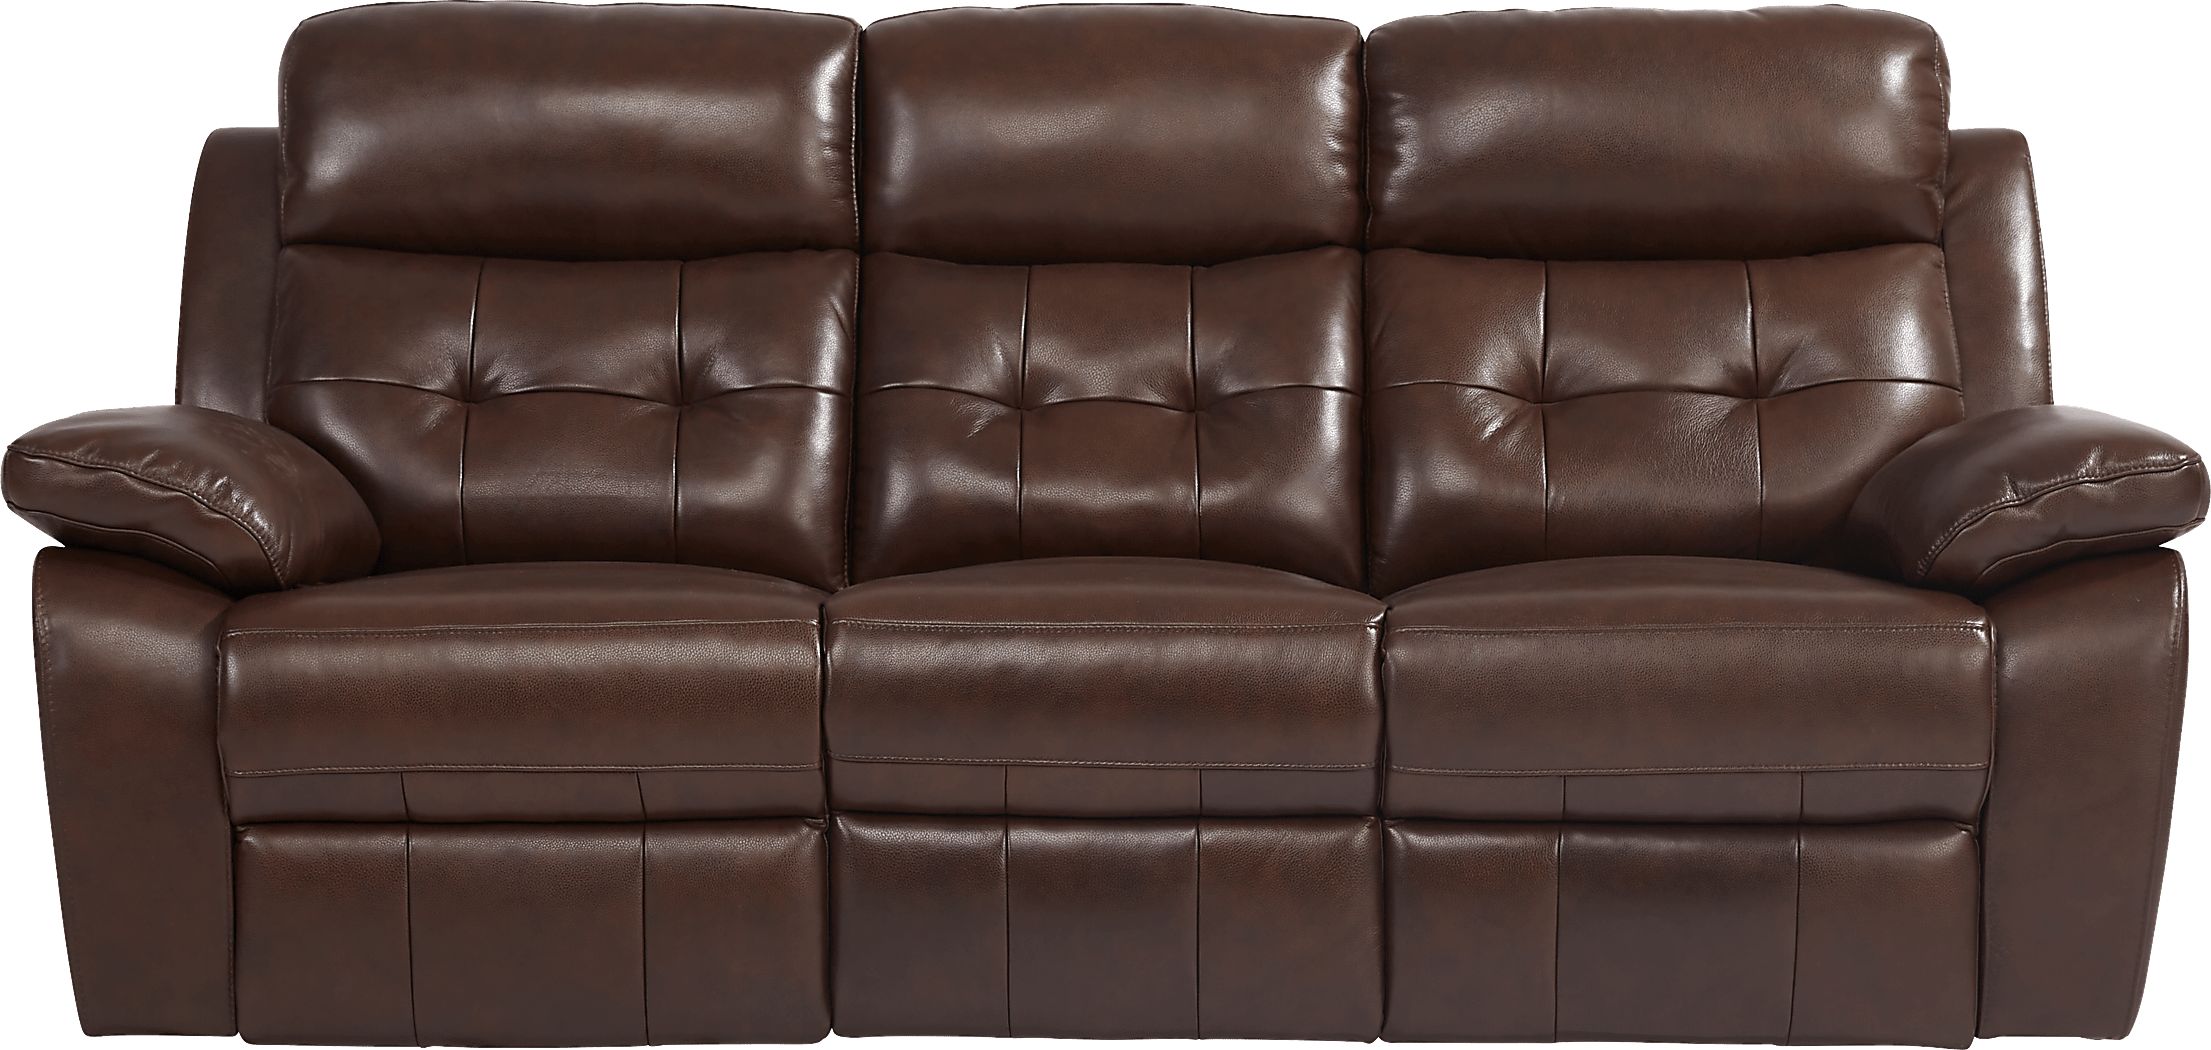 Antonin Brown Leather 7 Pc Living Room with Reclining Sofa